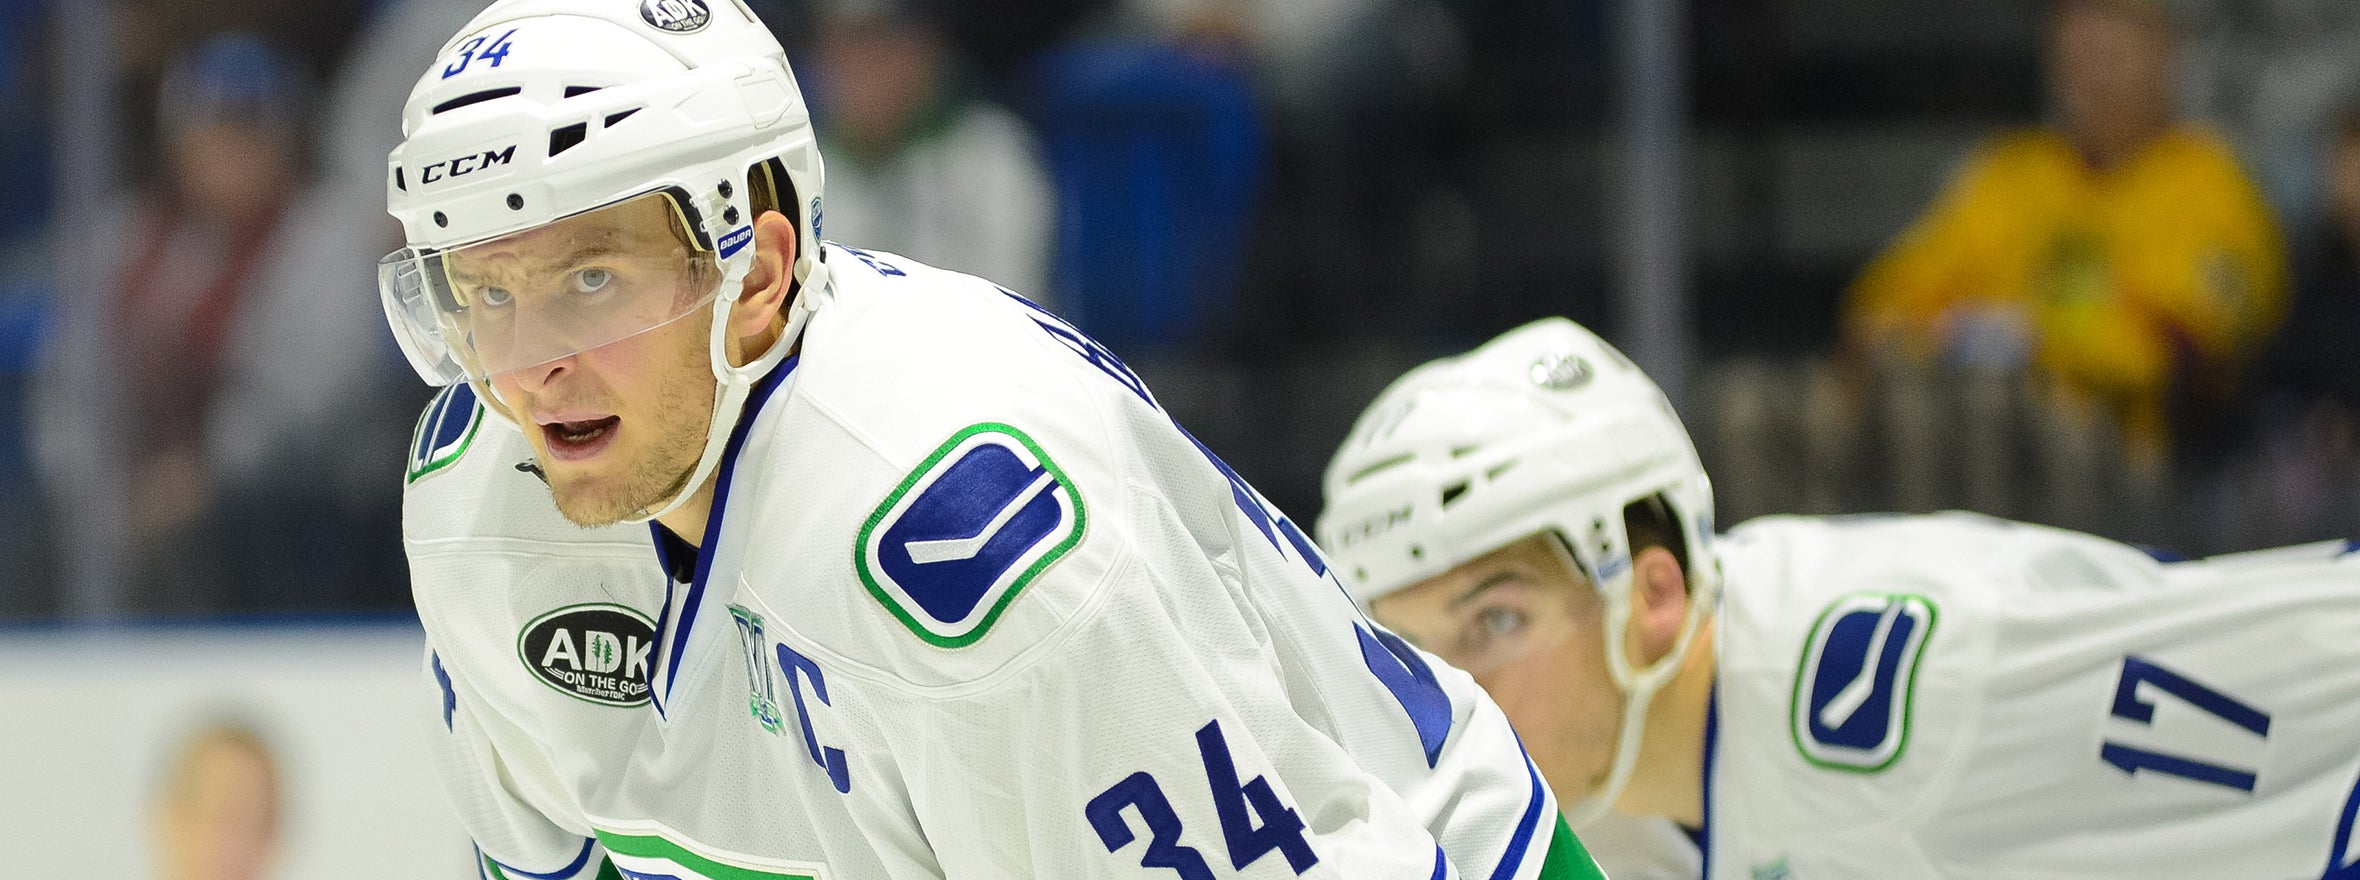 COMETS SIGN CARTER BANCKS TO TWO-YEAR EXTENSION